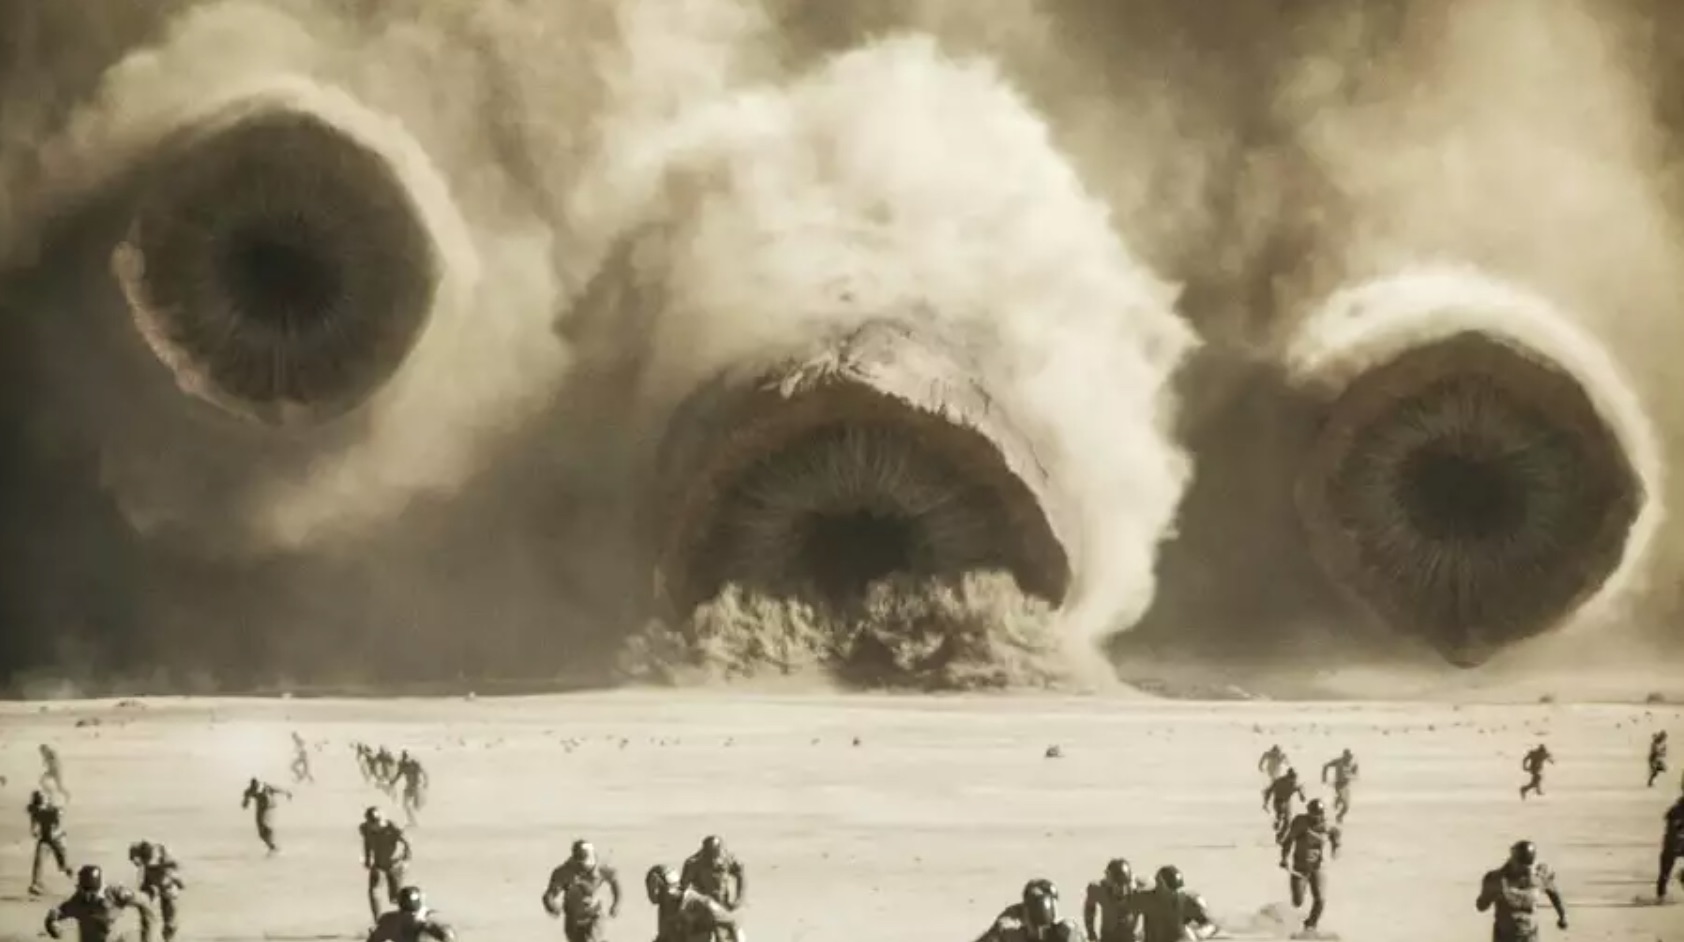 Giant worms erupt from the sand on an alien planet